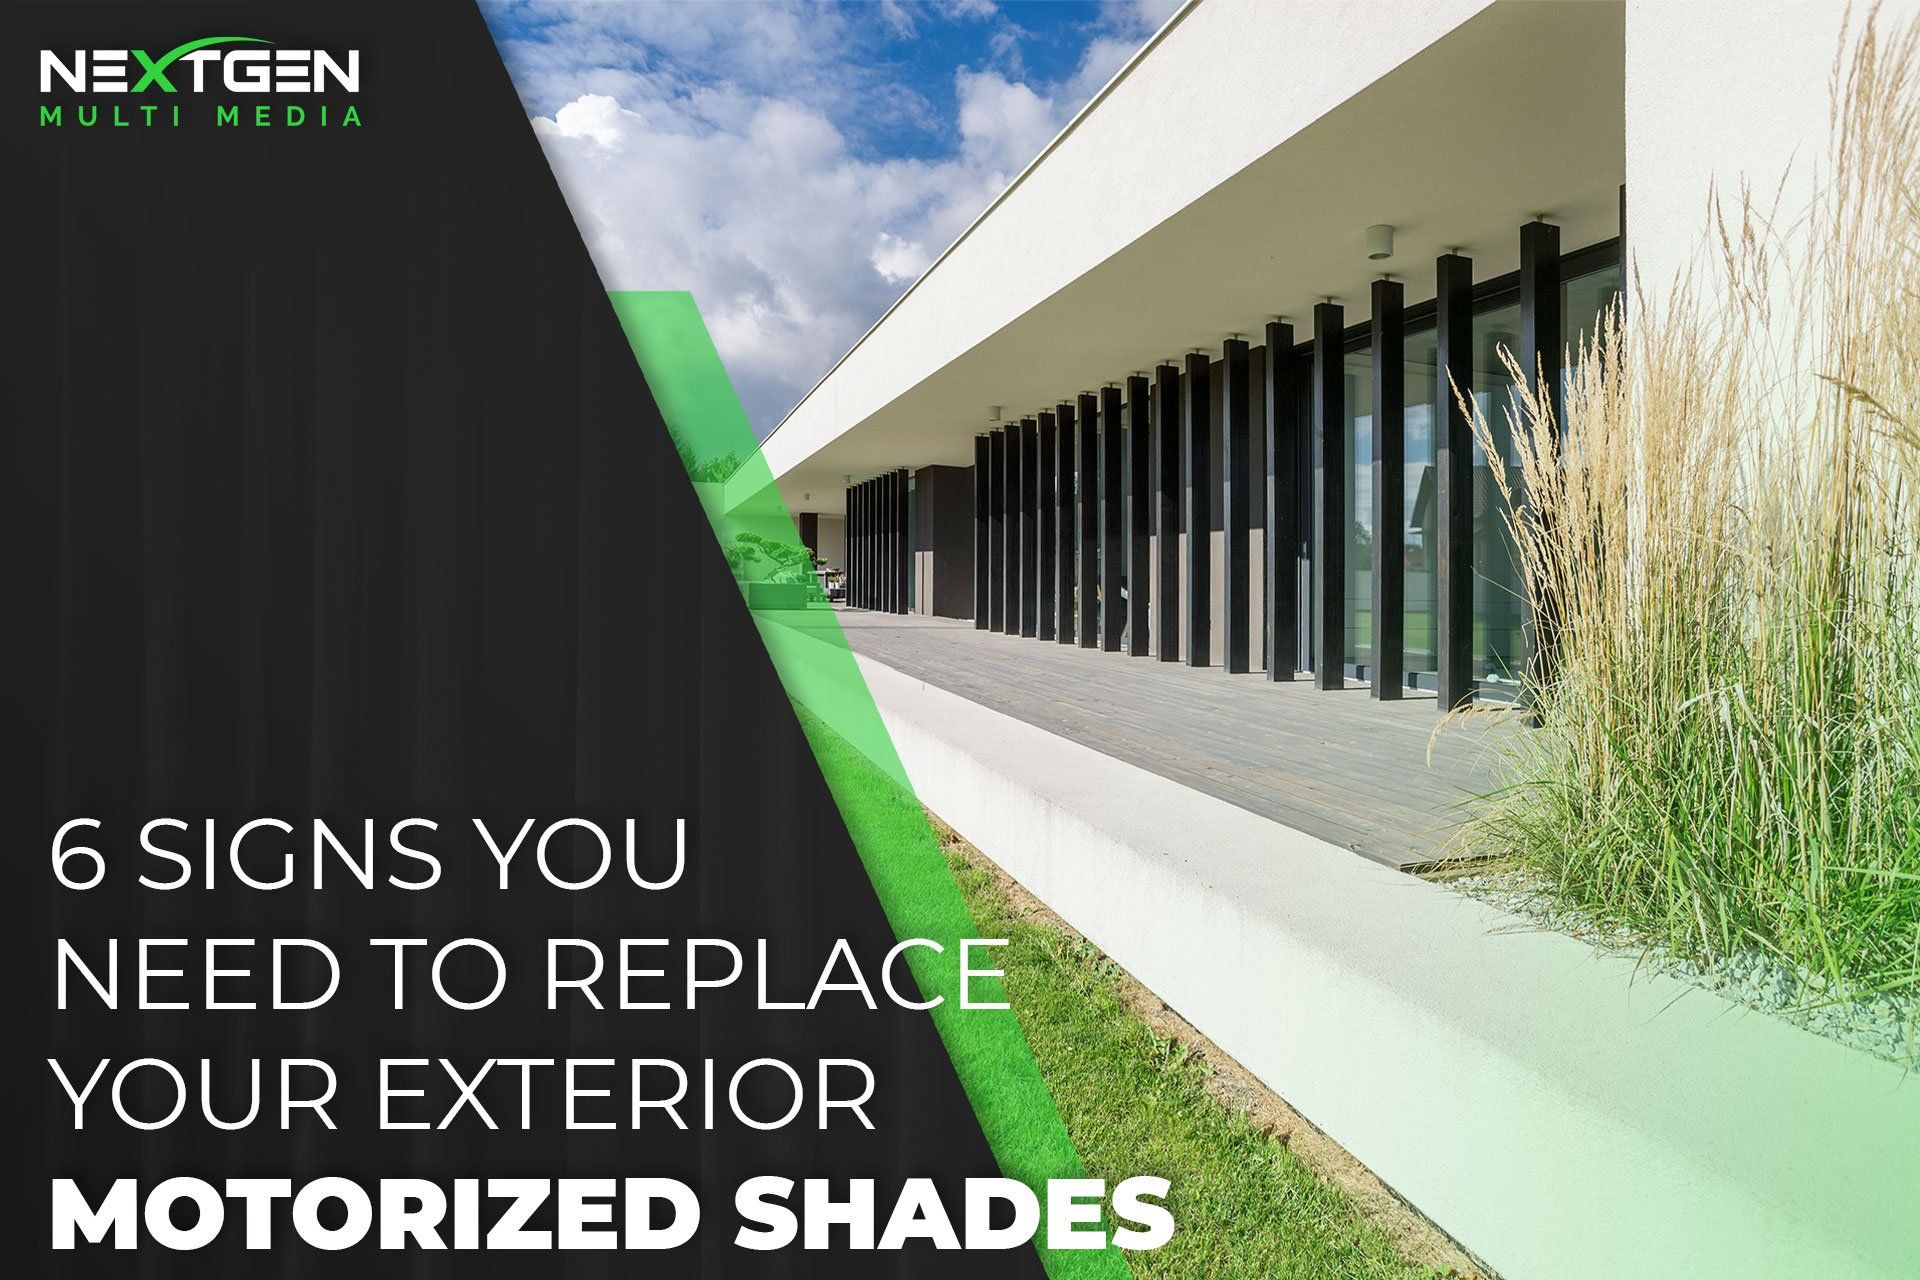 6 Signs You Need to Replace Your Exterior Motorized Shades | Nextgen Multi Media